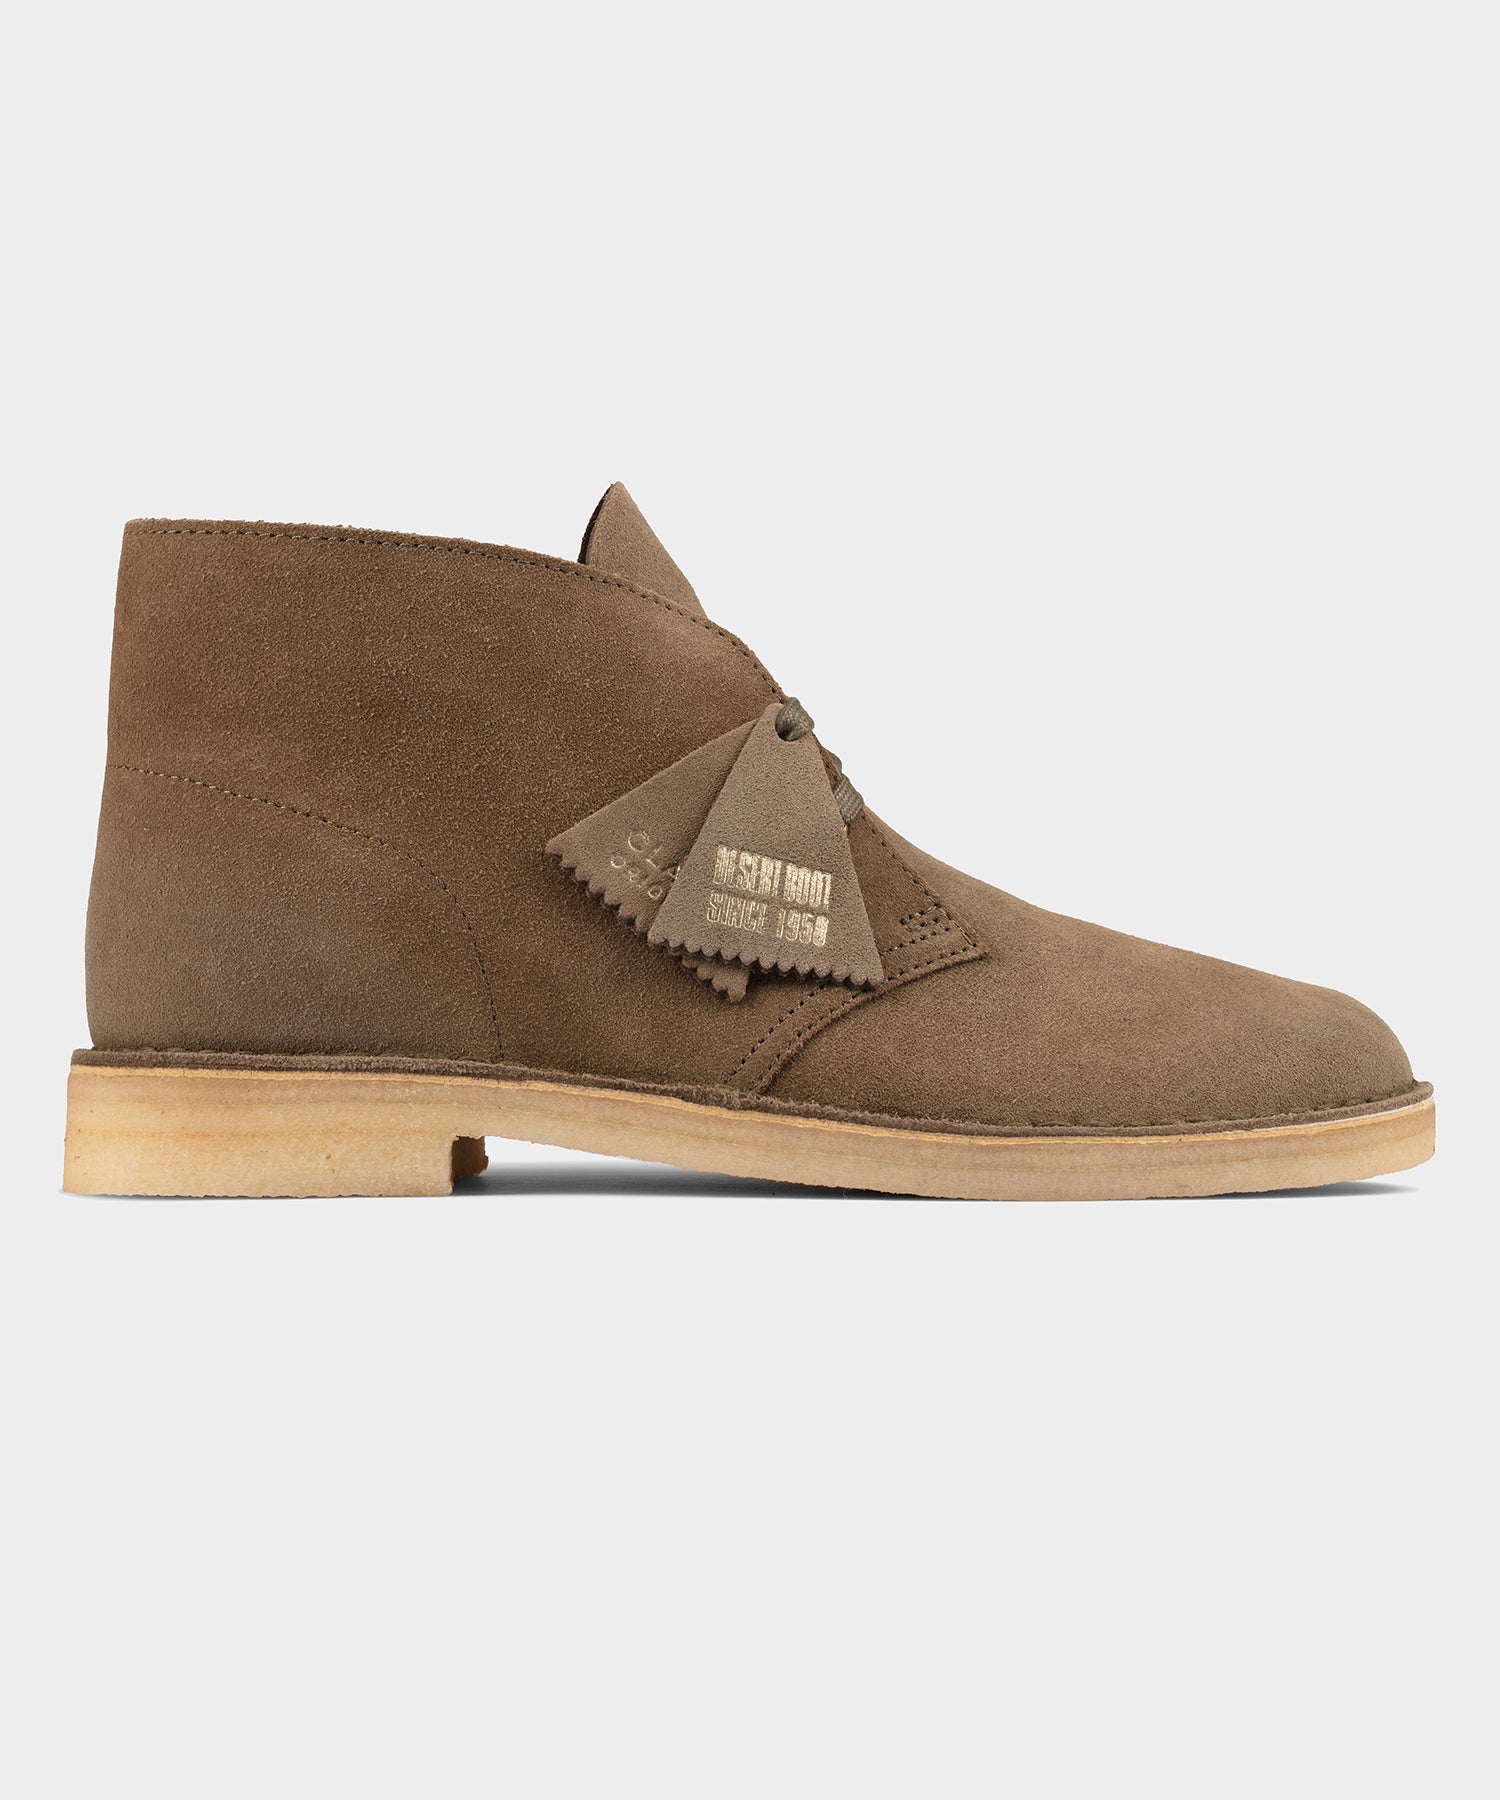 clarks wallabee olive suede